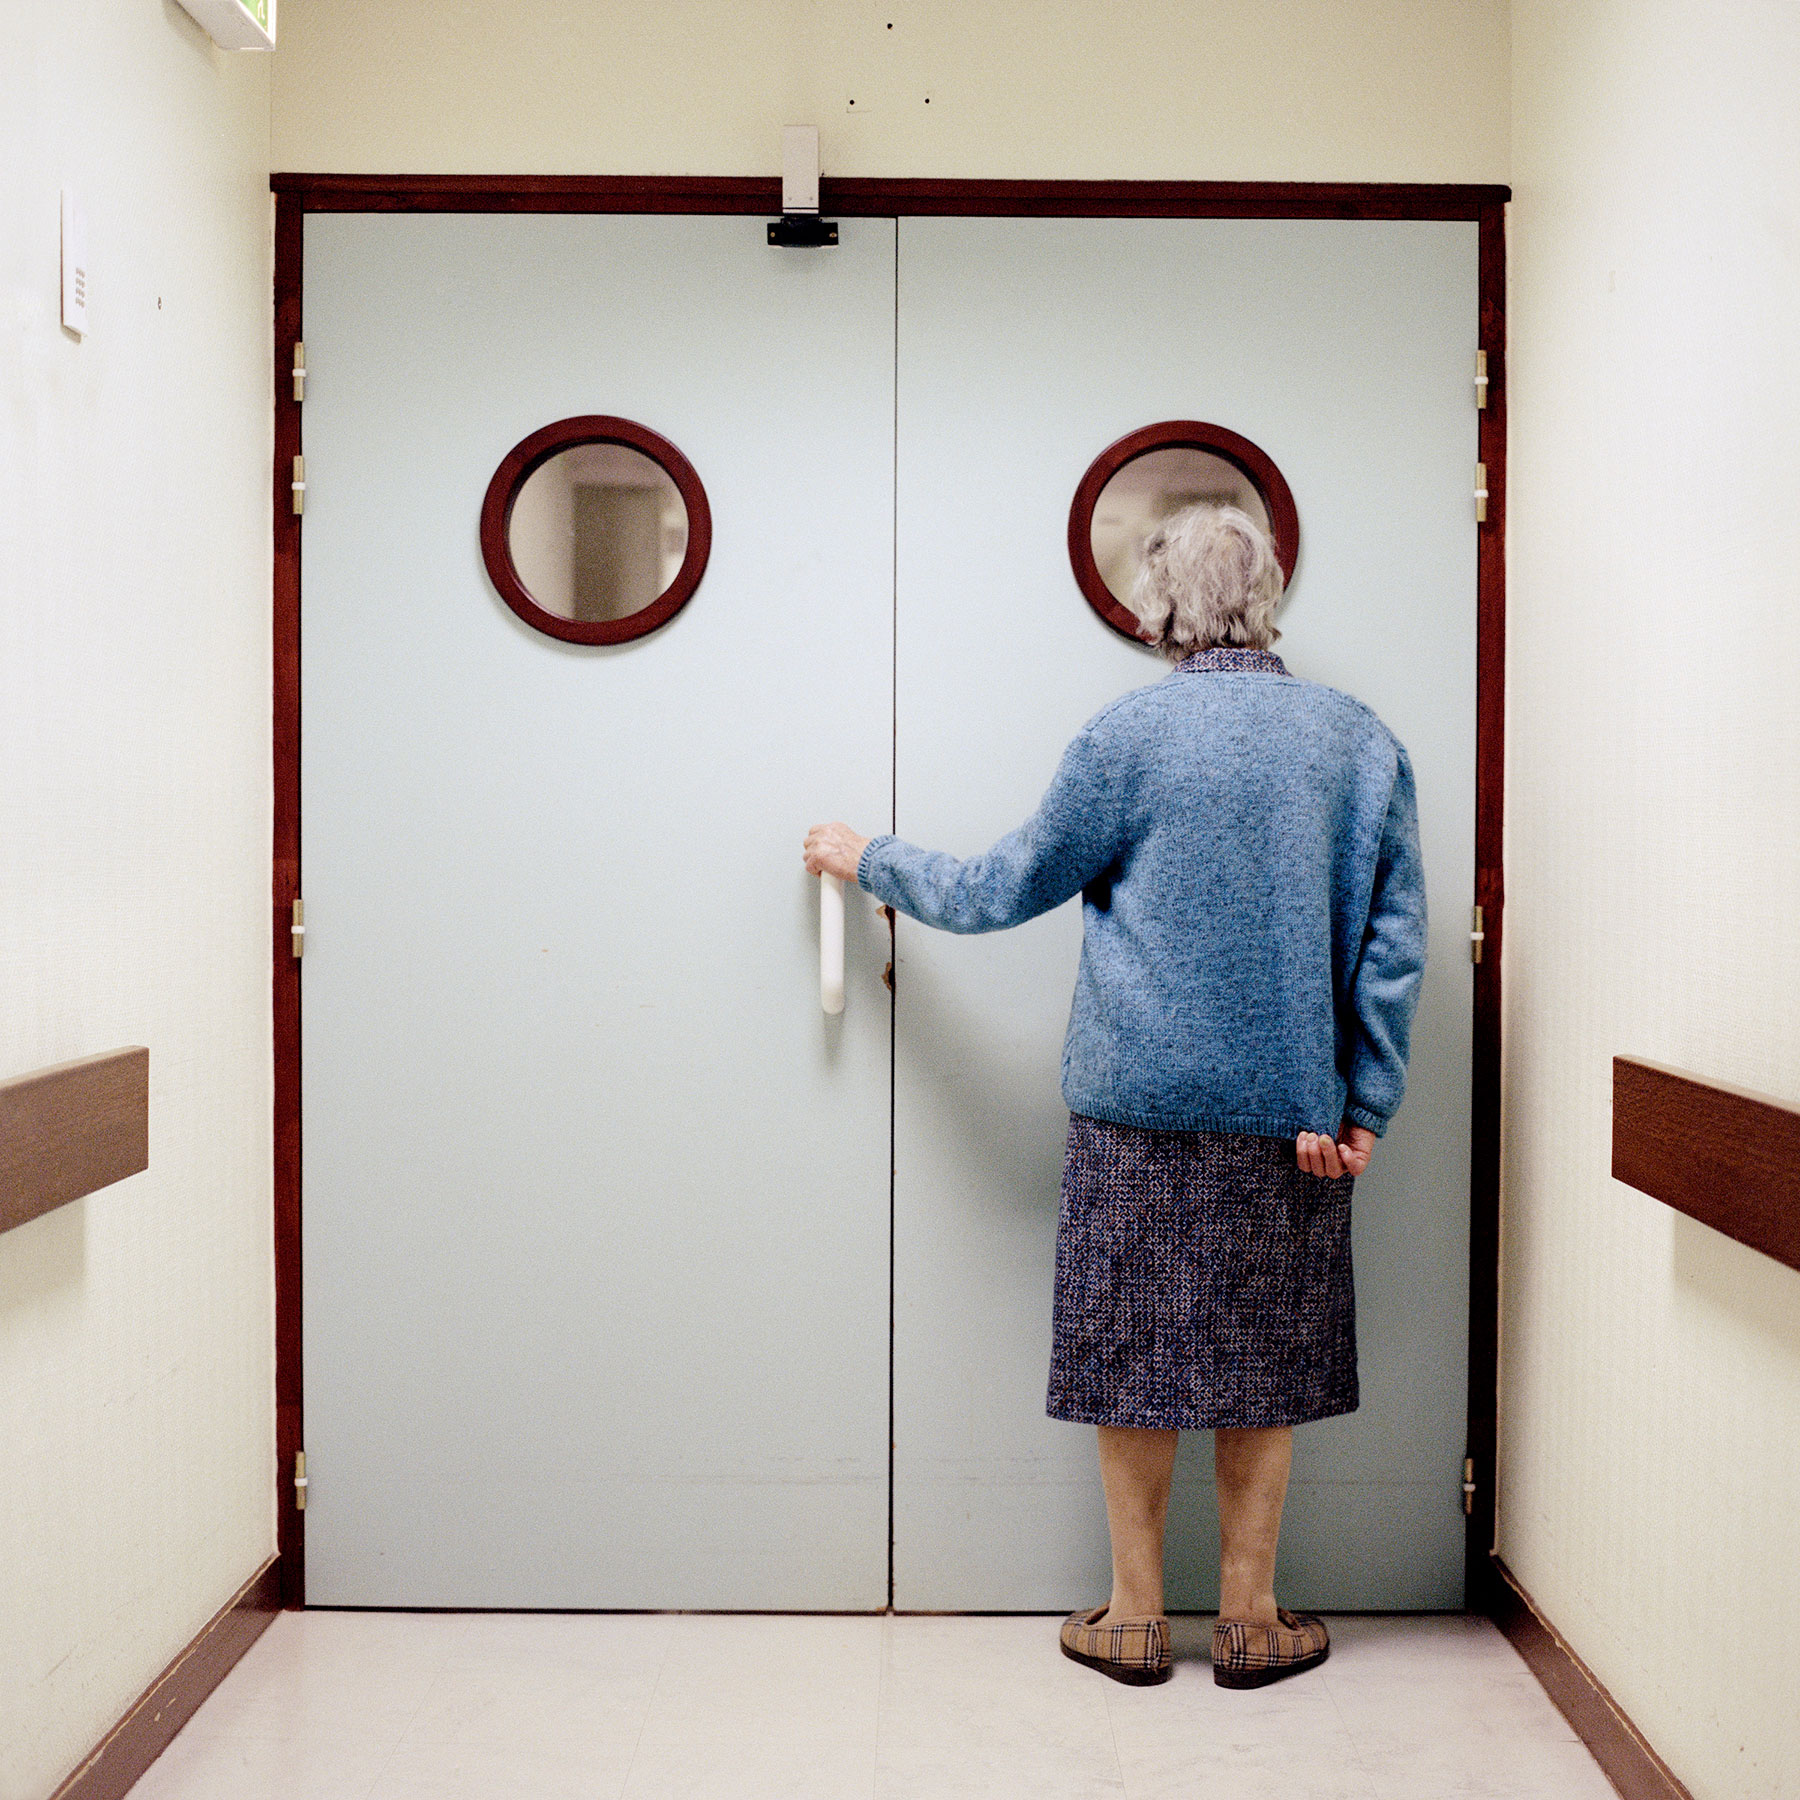  Resident stands in front of the ward’s locked exit. Doors and blocked passing’s are disturbing elements to a person suffering from Alzheimer’s due to the common symptom to regularly often wander about. As a result of the potential risk of getting lo